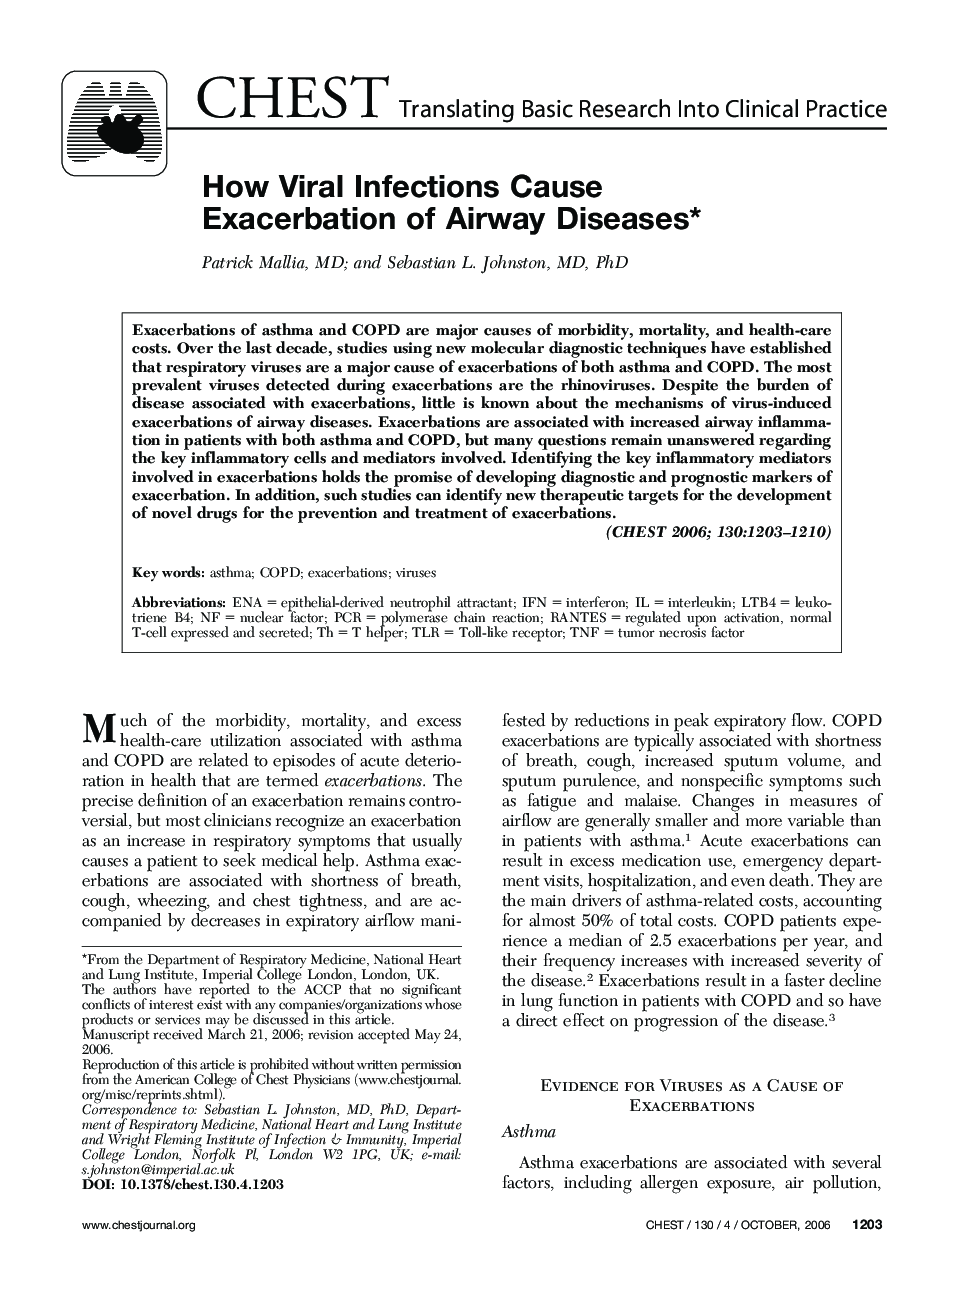 How Viral Infections Cause Exacerbation of Airway Diseases